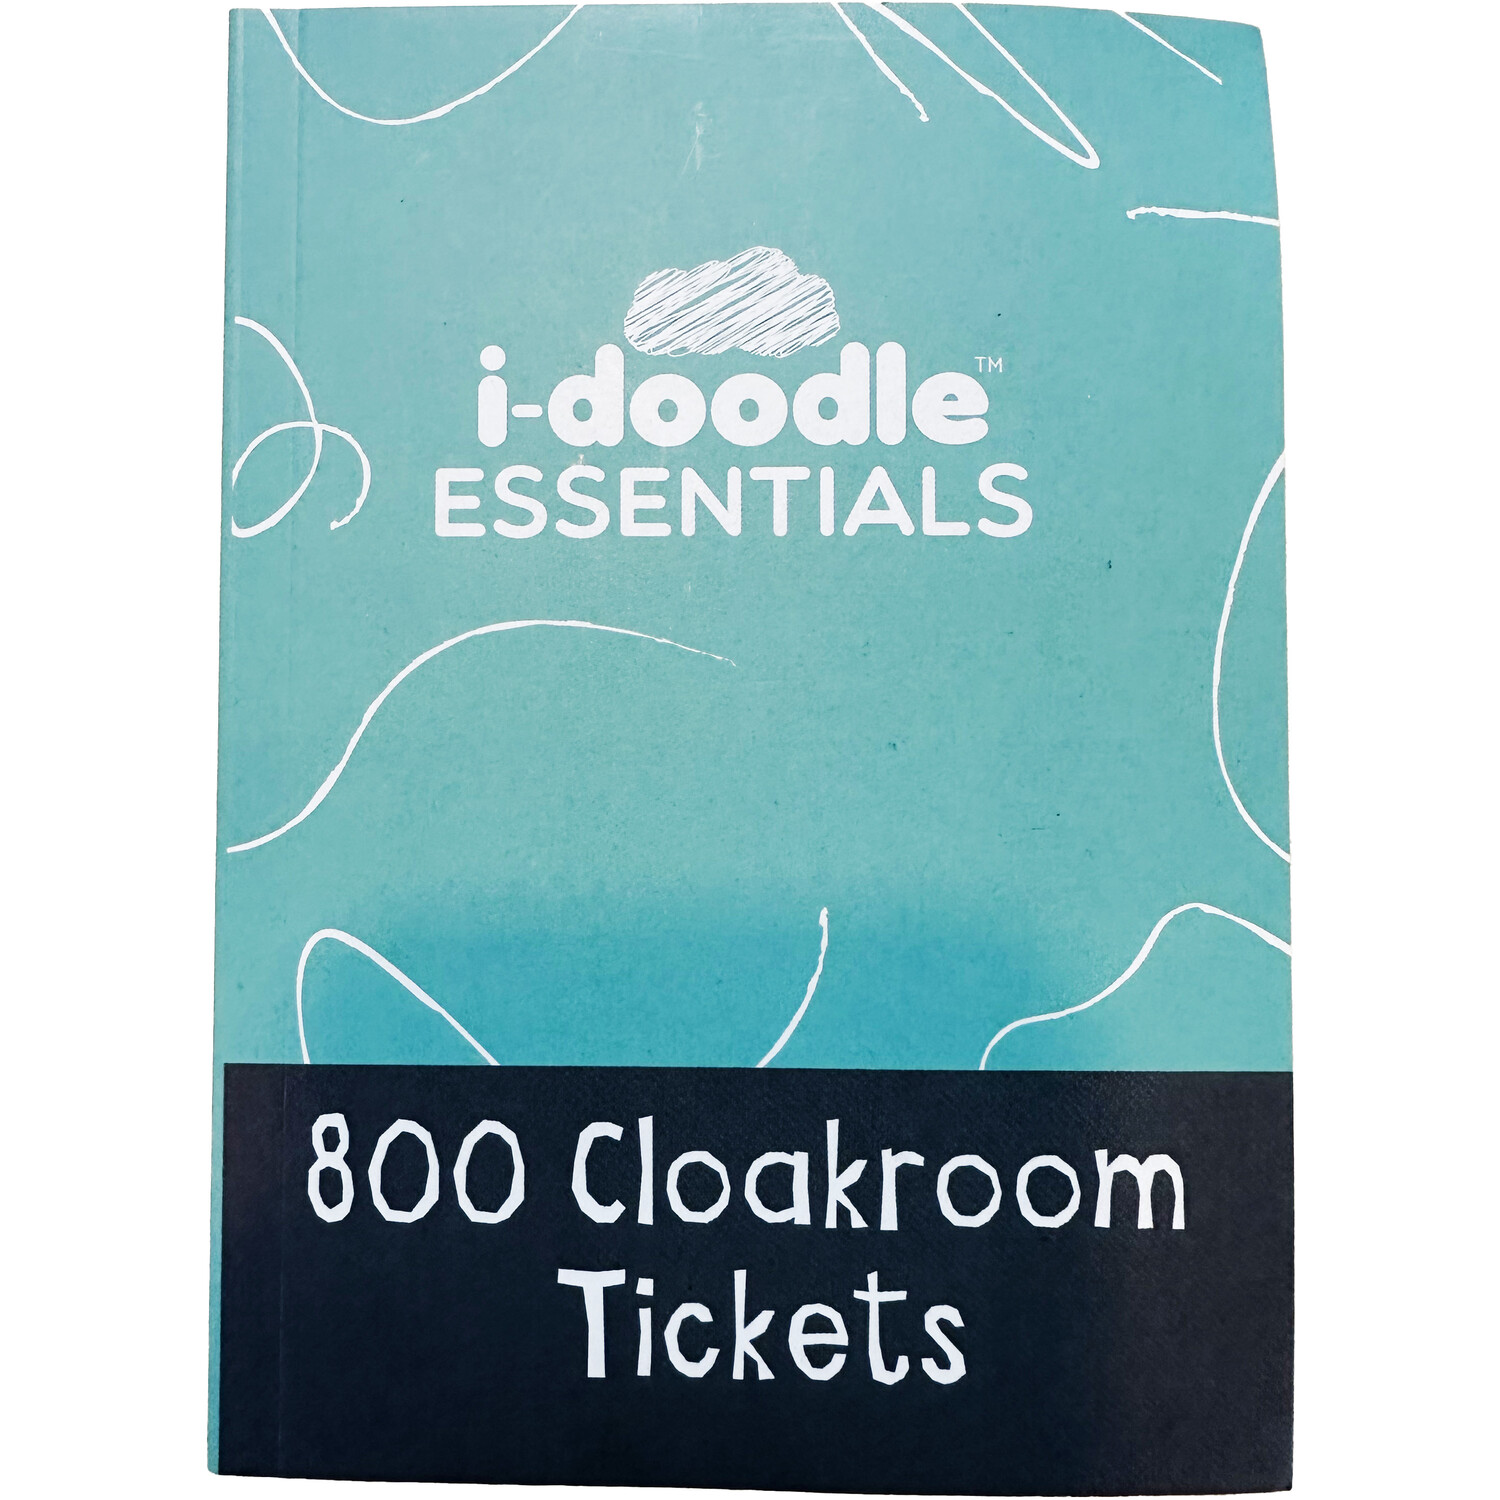 Cloakroom 800 Tickets Image